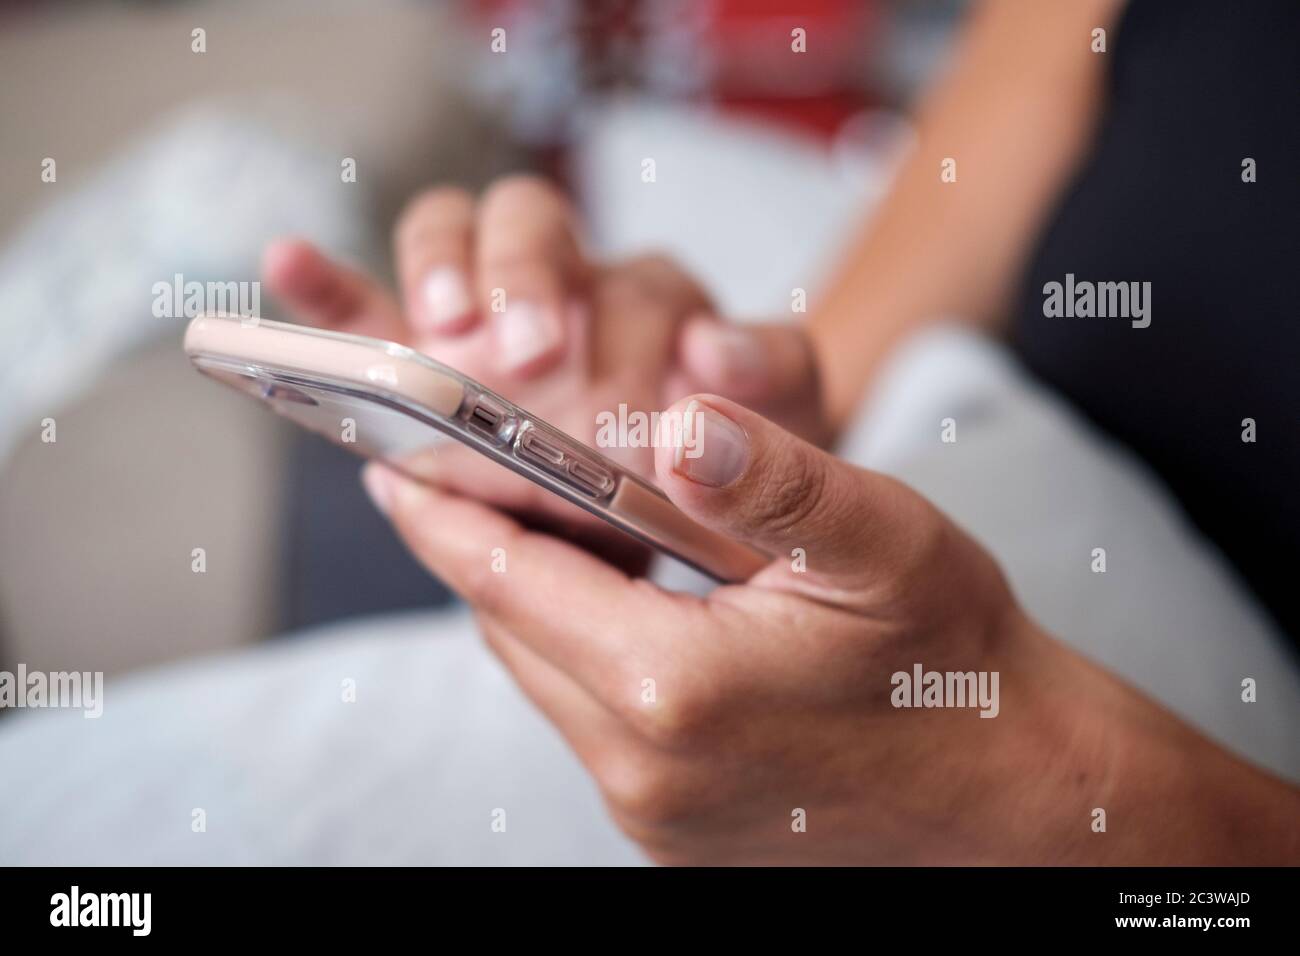 Woman texting on smart phone-close-up Stock Photo